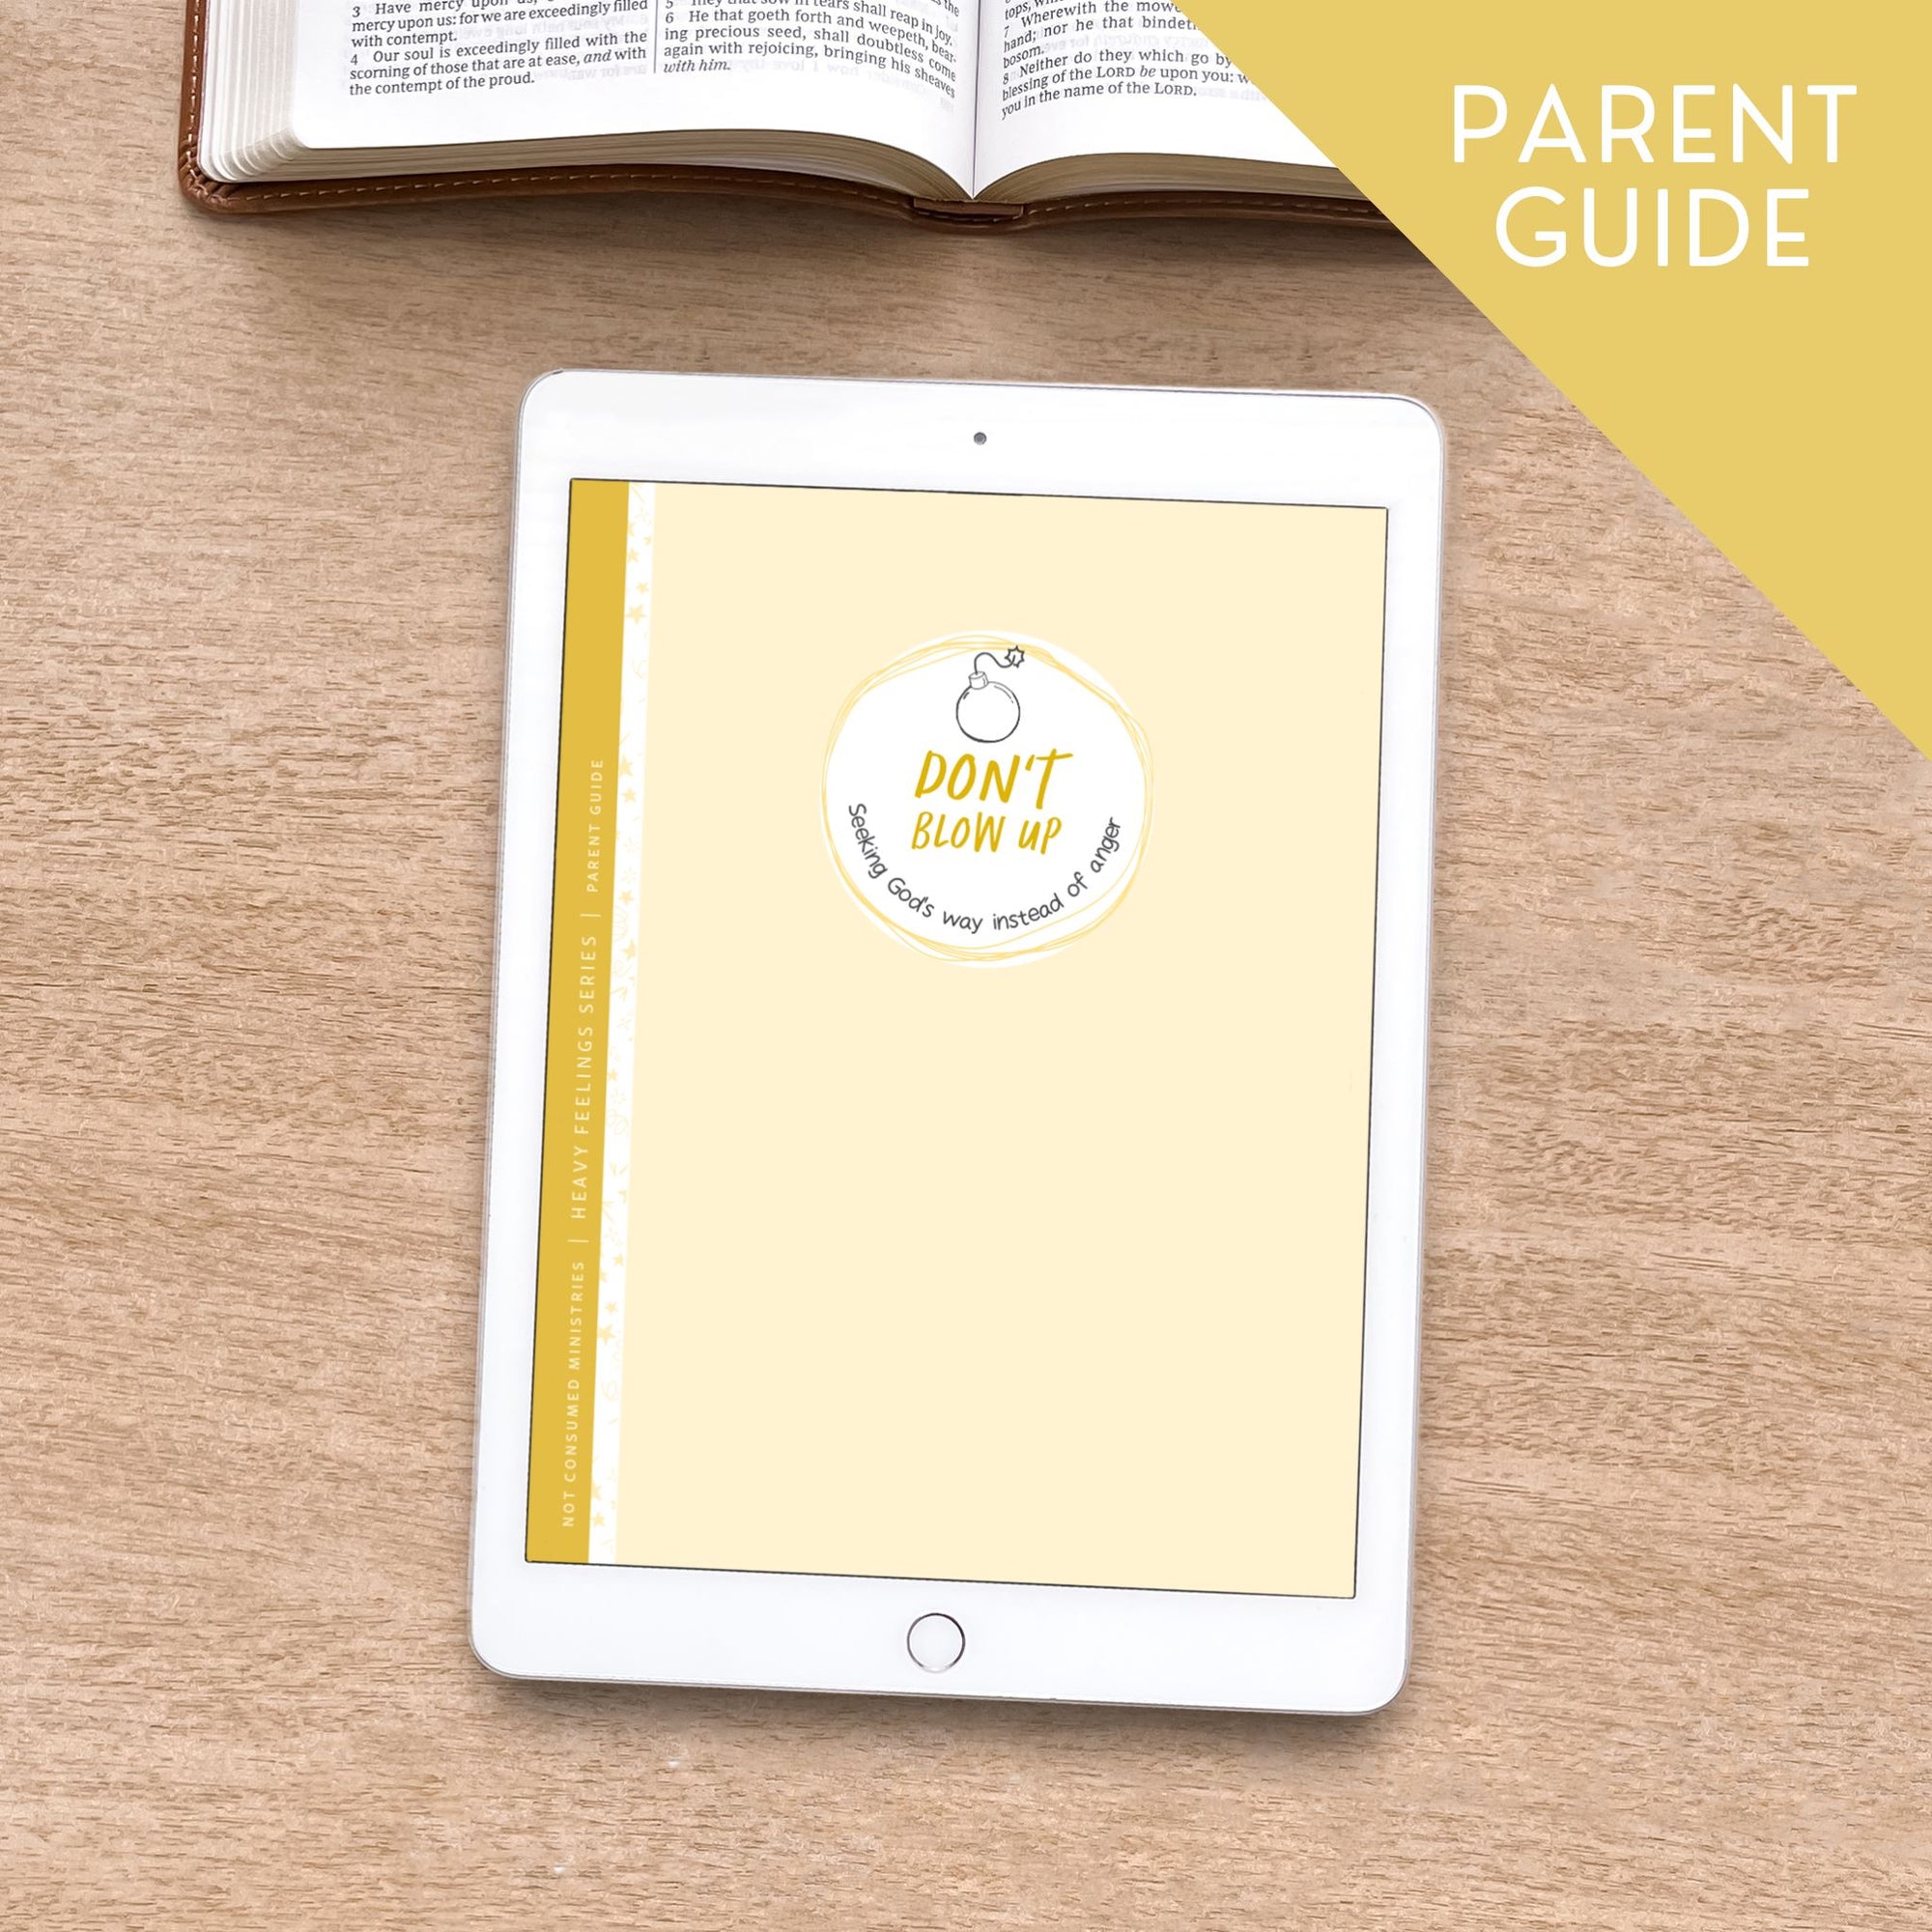 Don't Blow Up Bible Study on anger parent guide- Digital